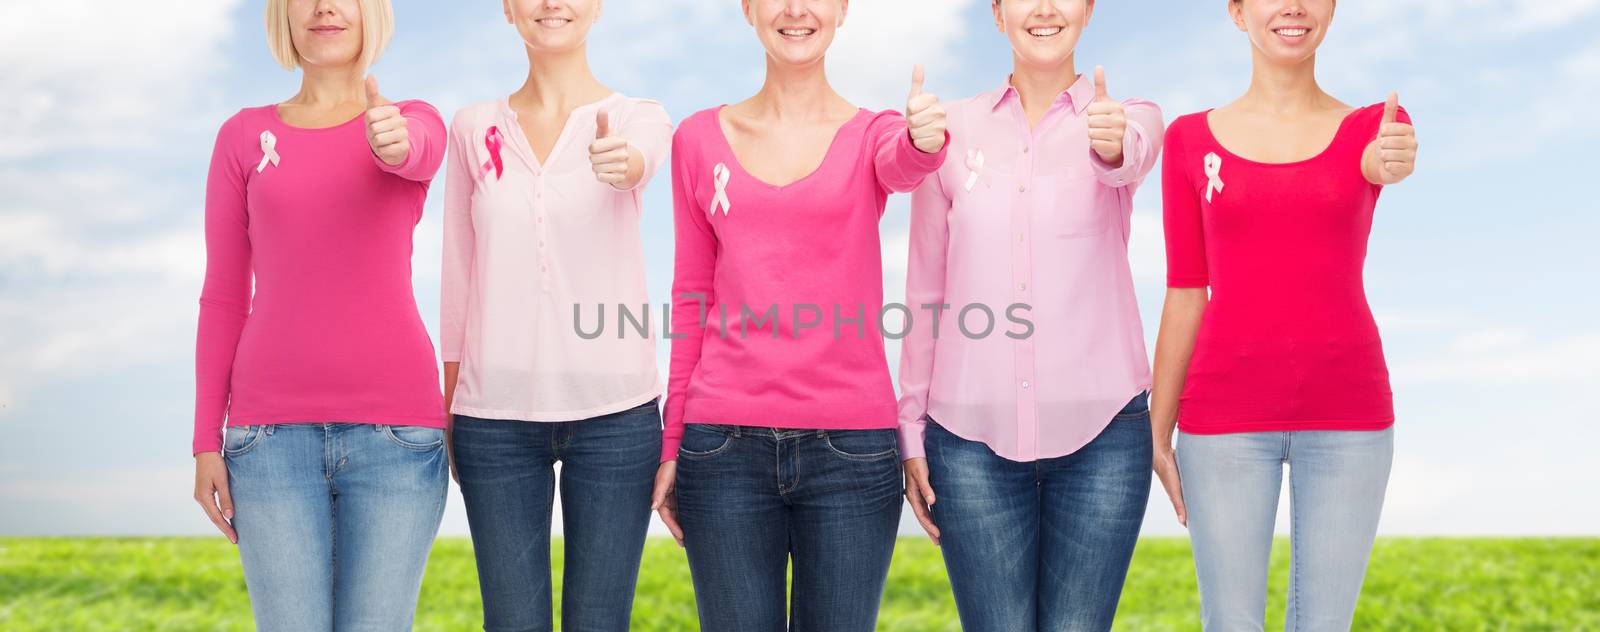 healthcare, people, gesture and medicine concept - close up of smiling women in blank shirts with pink breast cancer awareness ribbons over blue sky and grass background